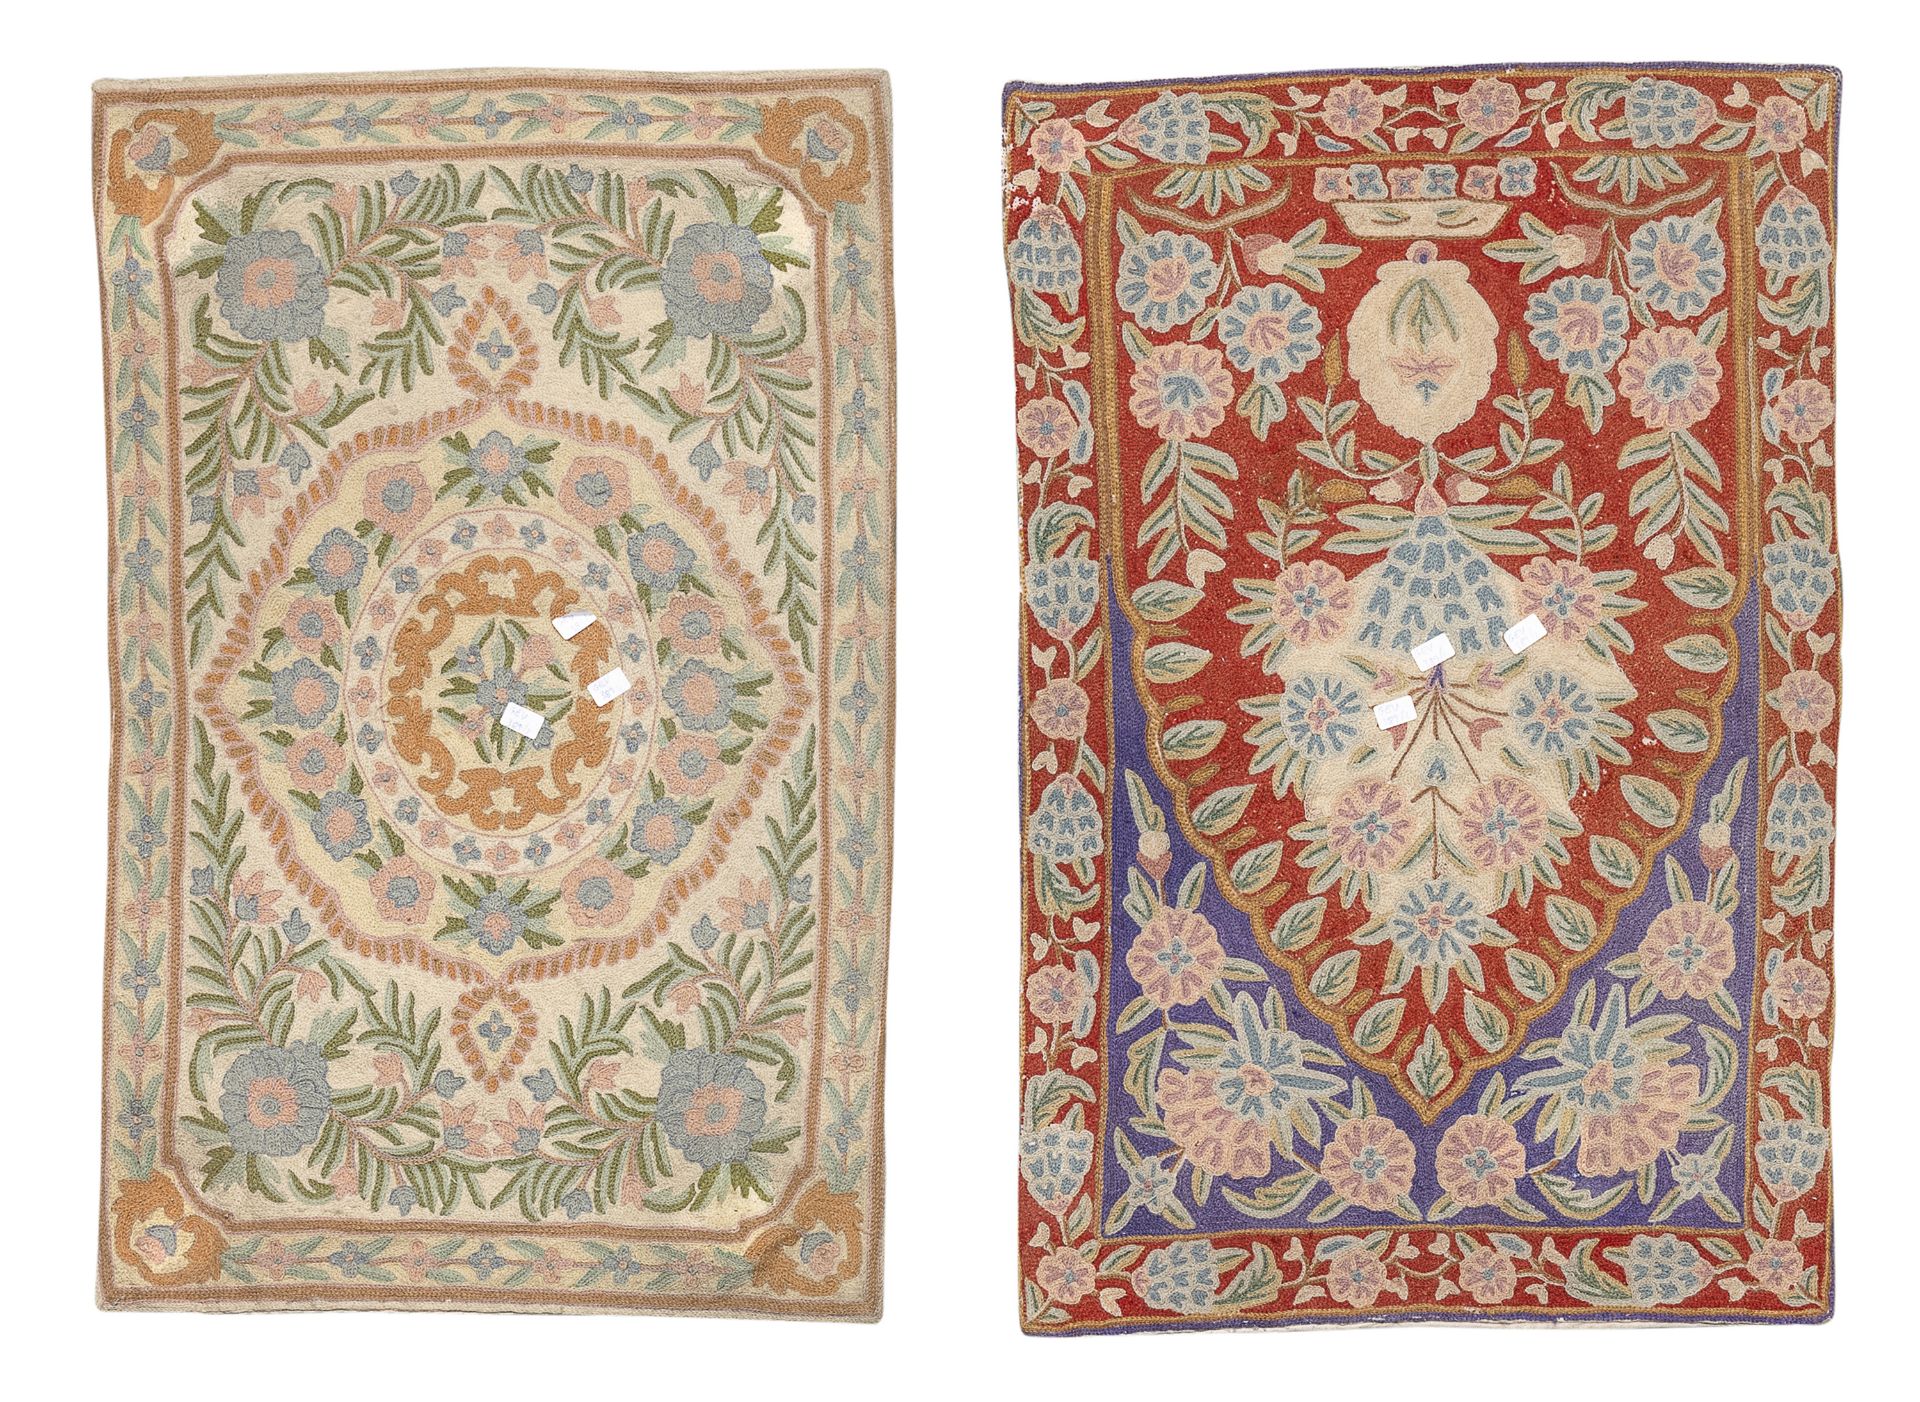 PAIR OF SMALL CARPETS PROBABLY 20TH CENTURY INDIA